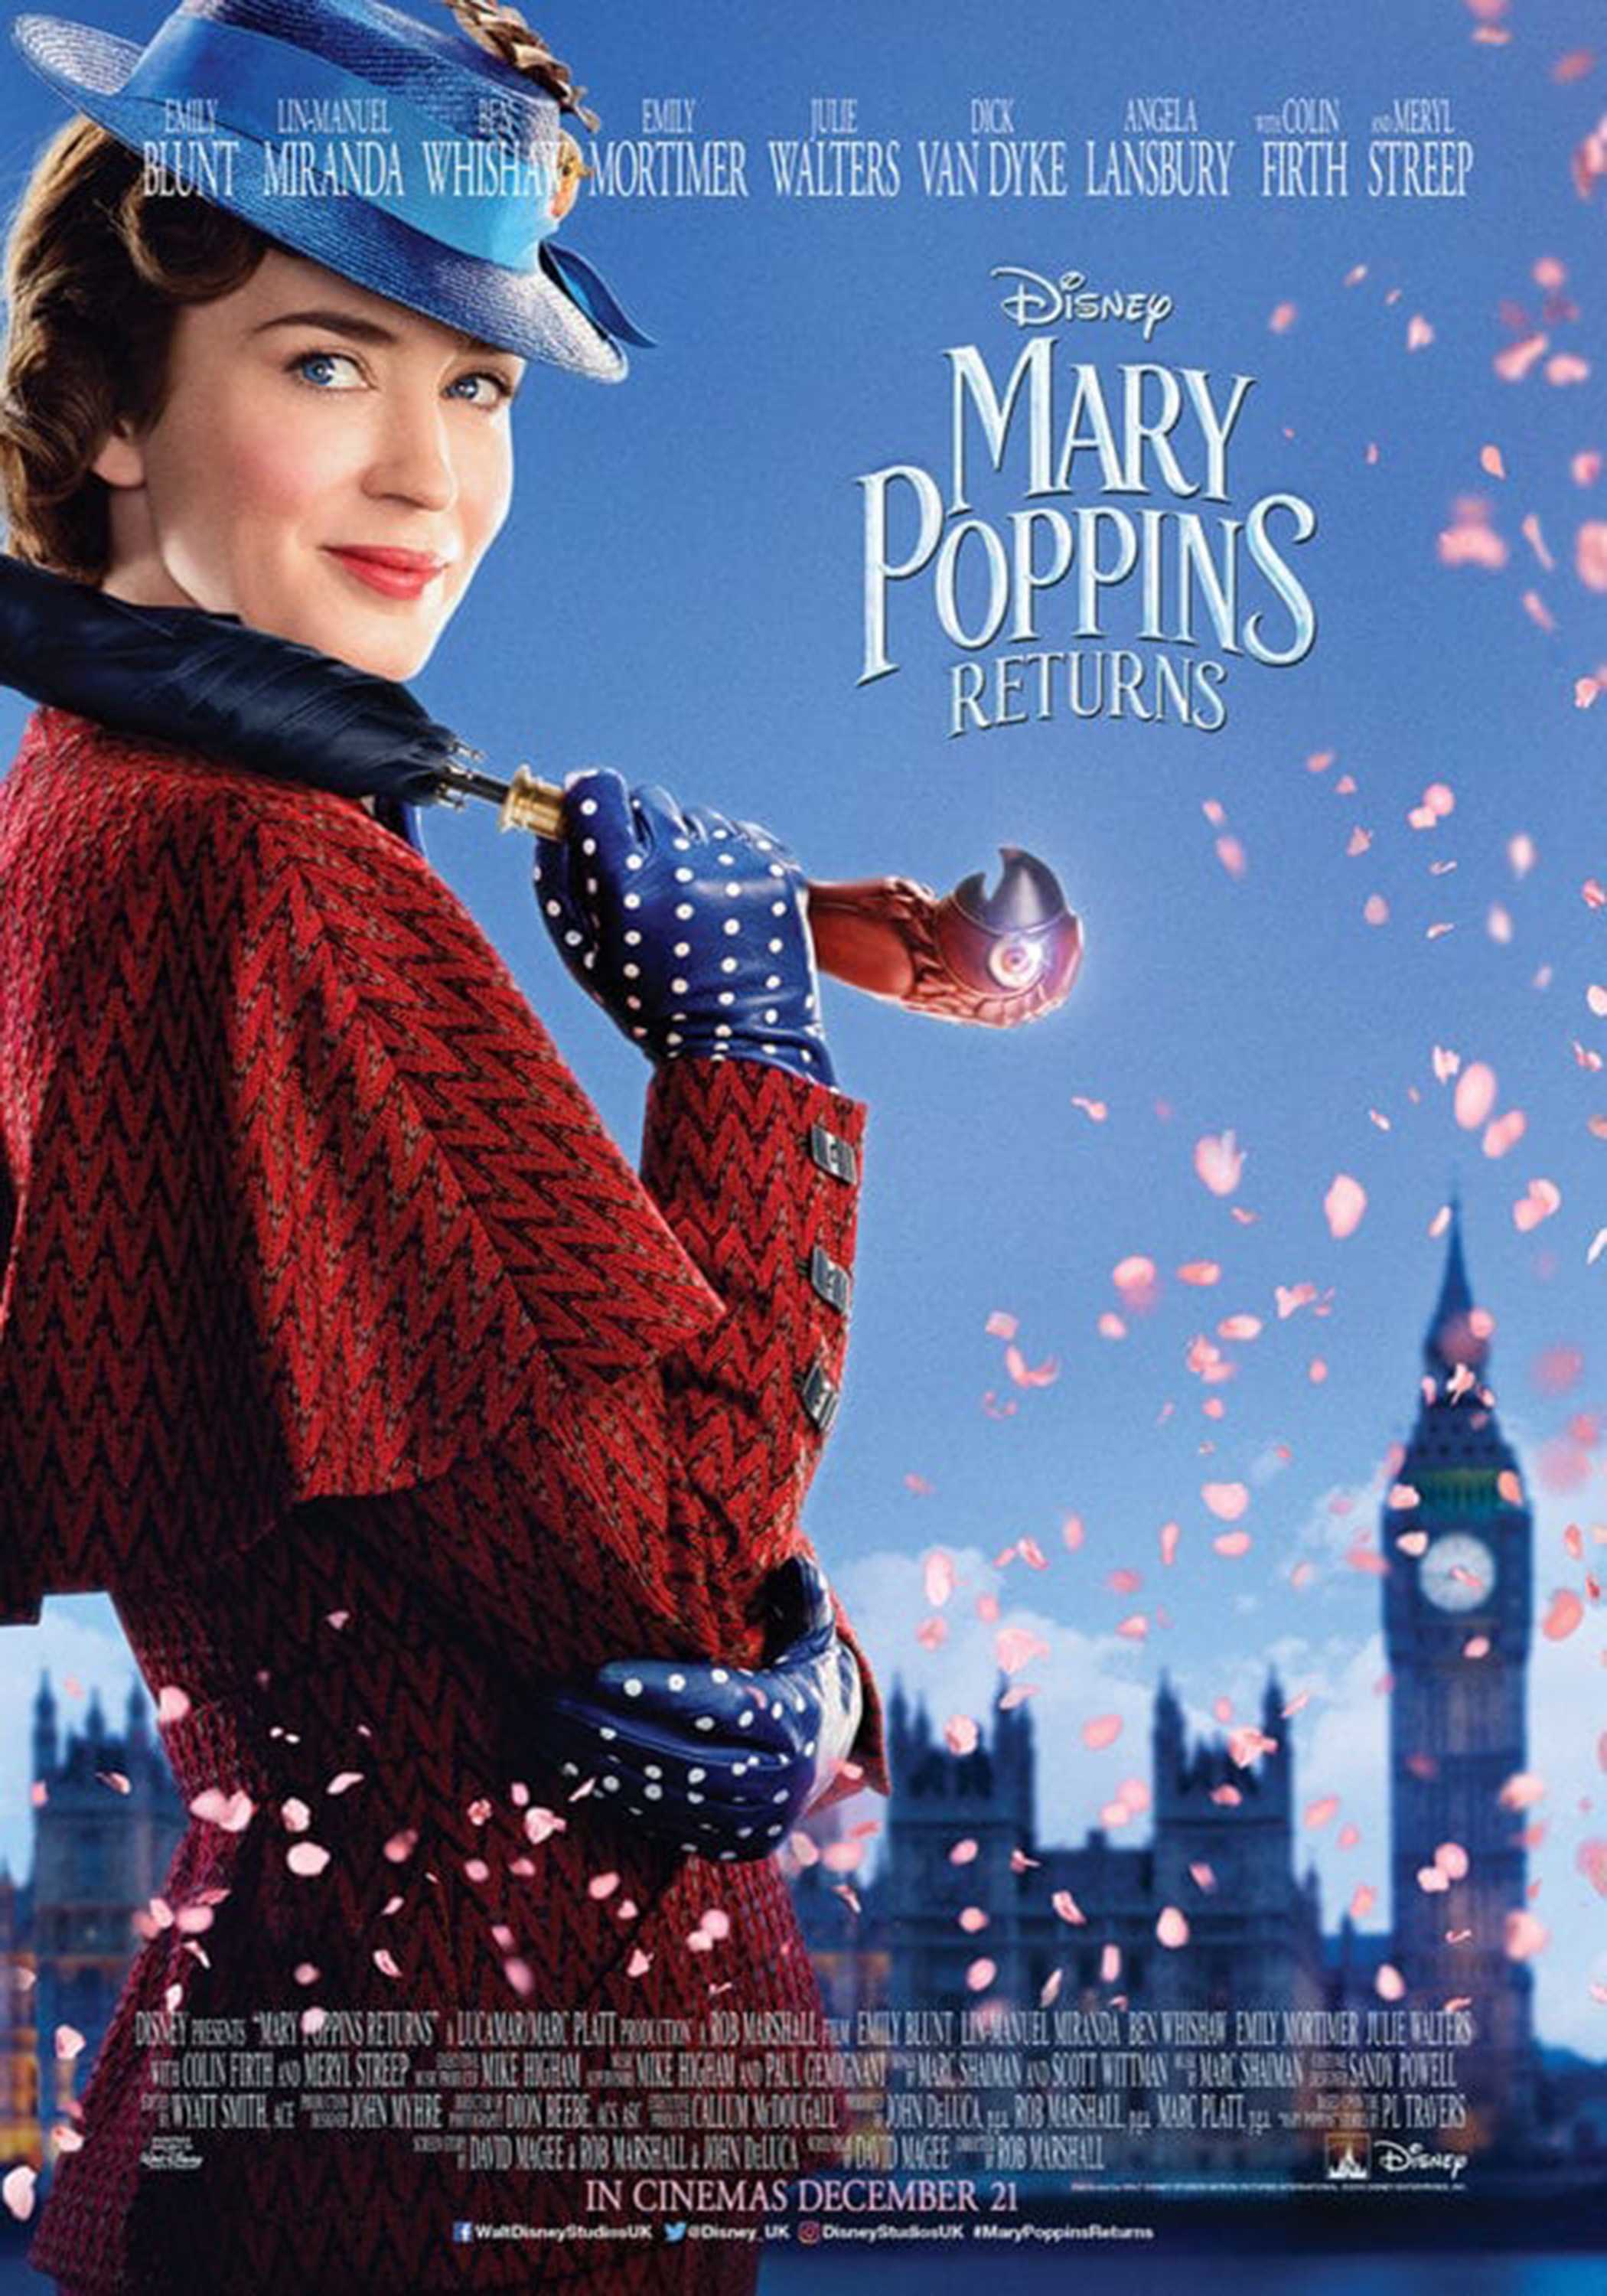 Movie review: Mary Poppins Returns, Emily Blunt is delightful in sweet, nostalgic sequel